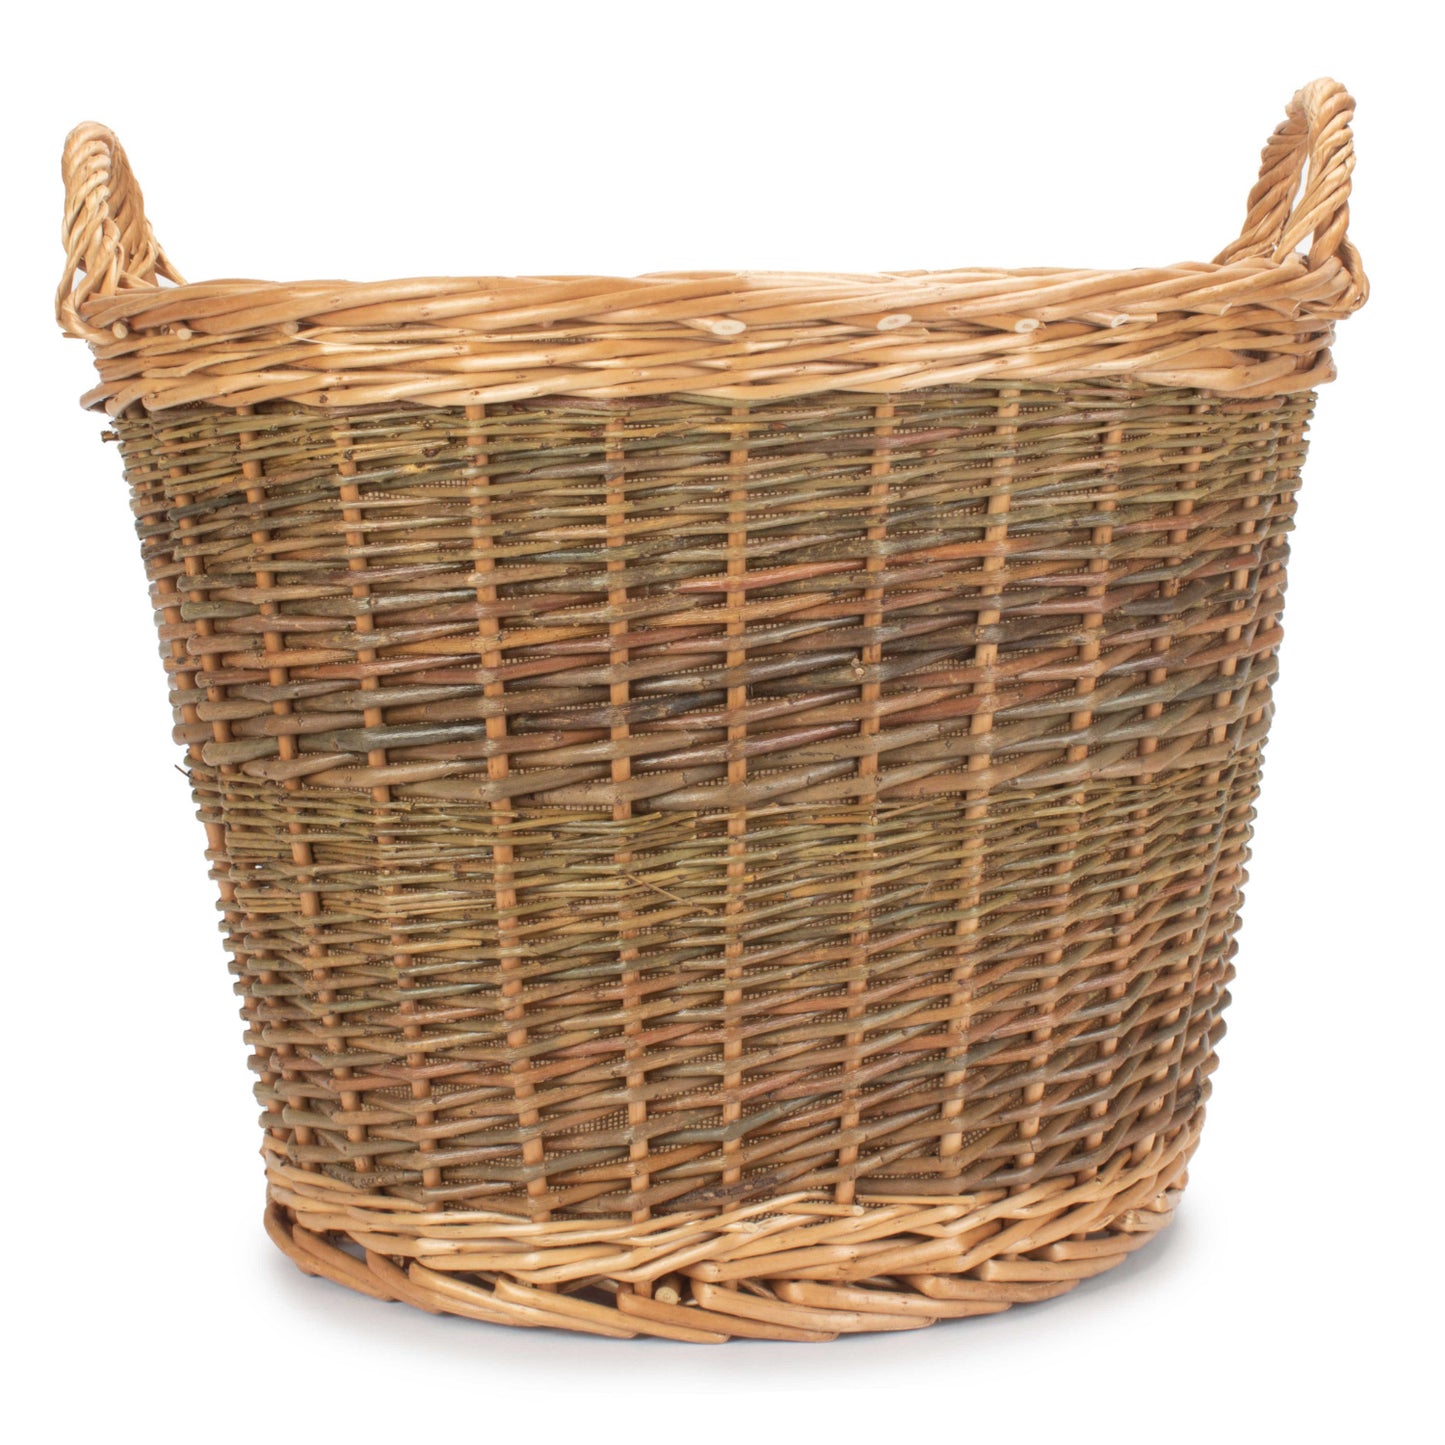 Unpeeled Log Basket With Lining